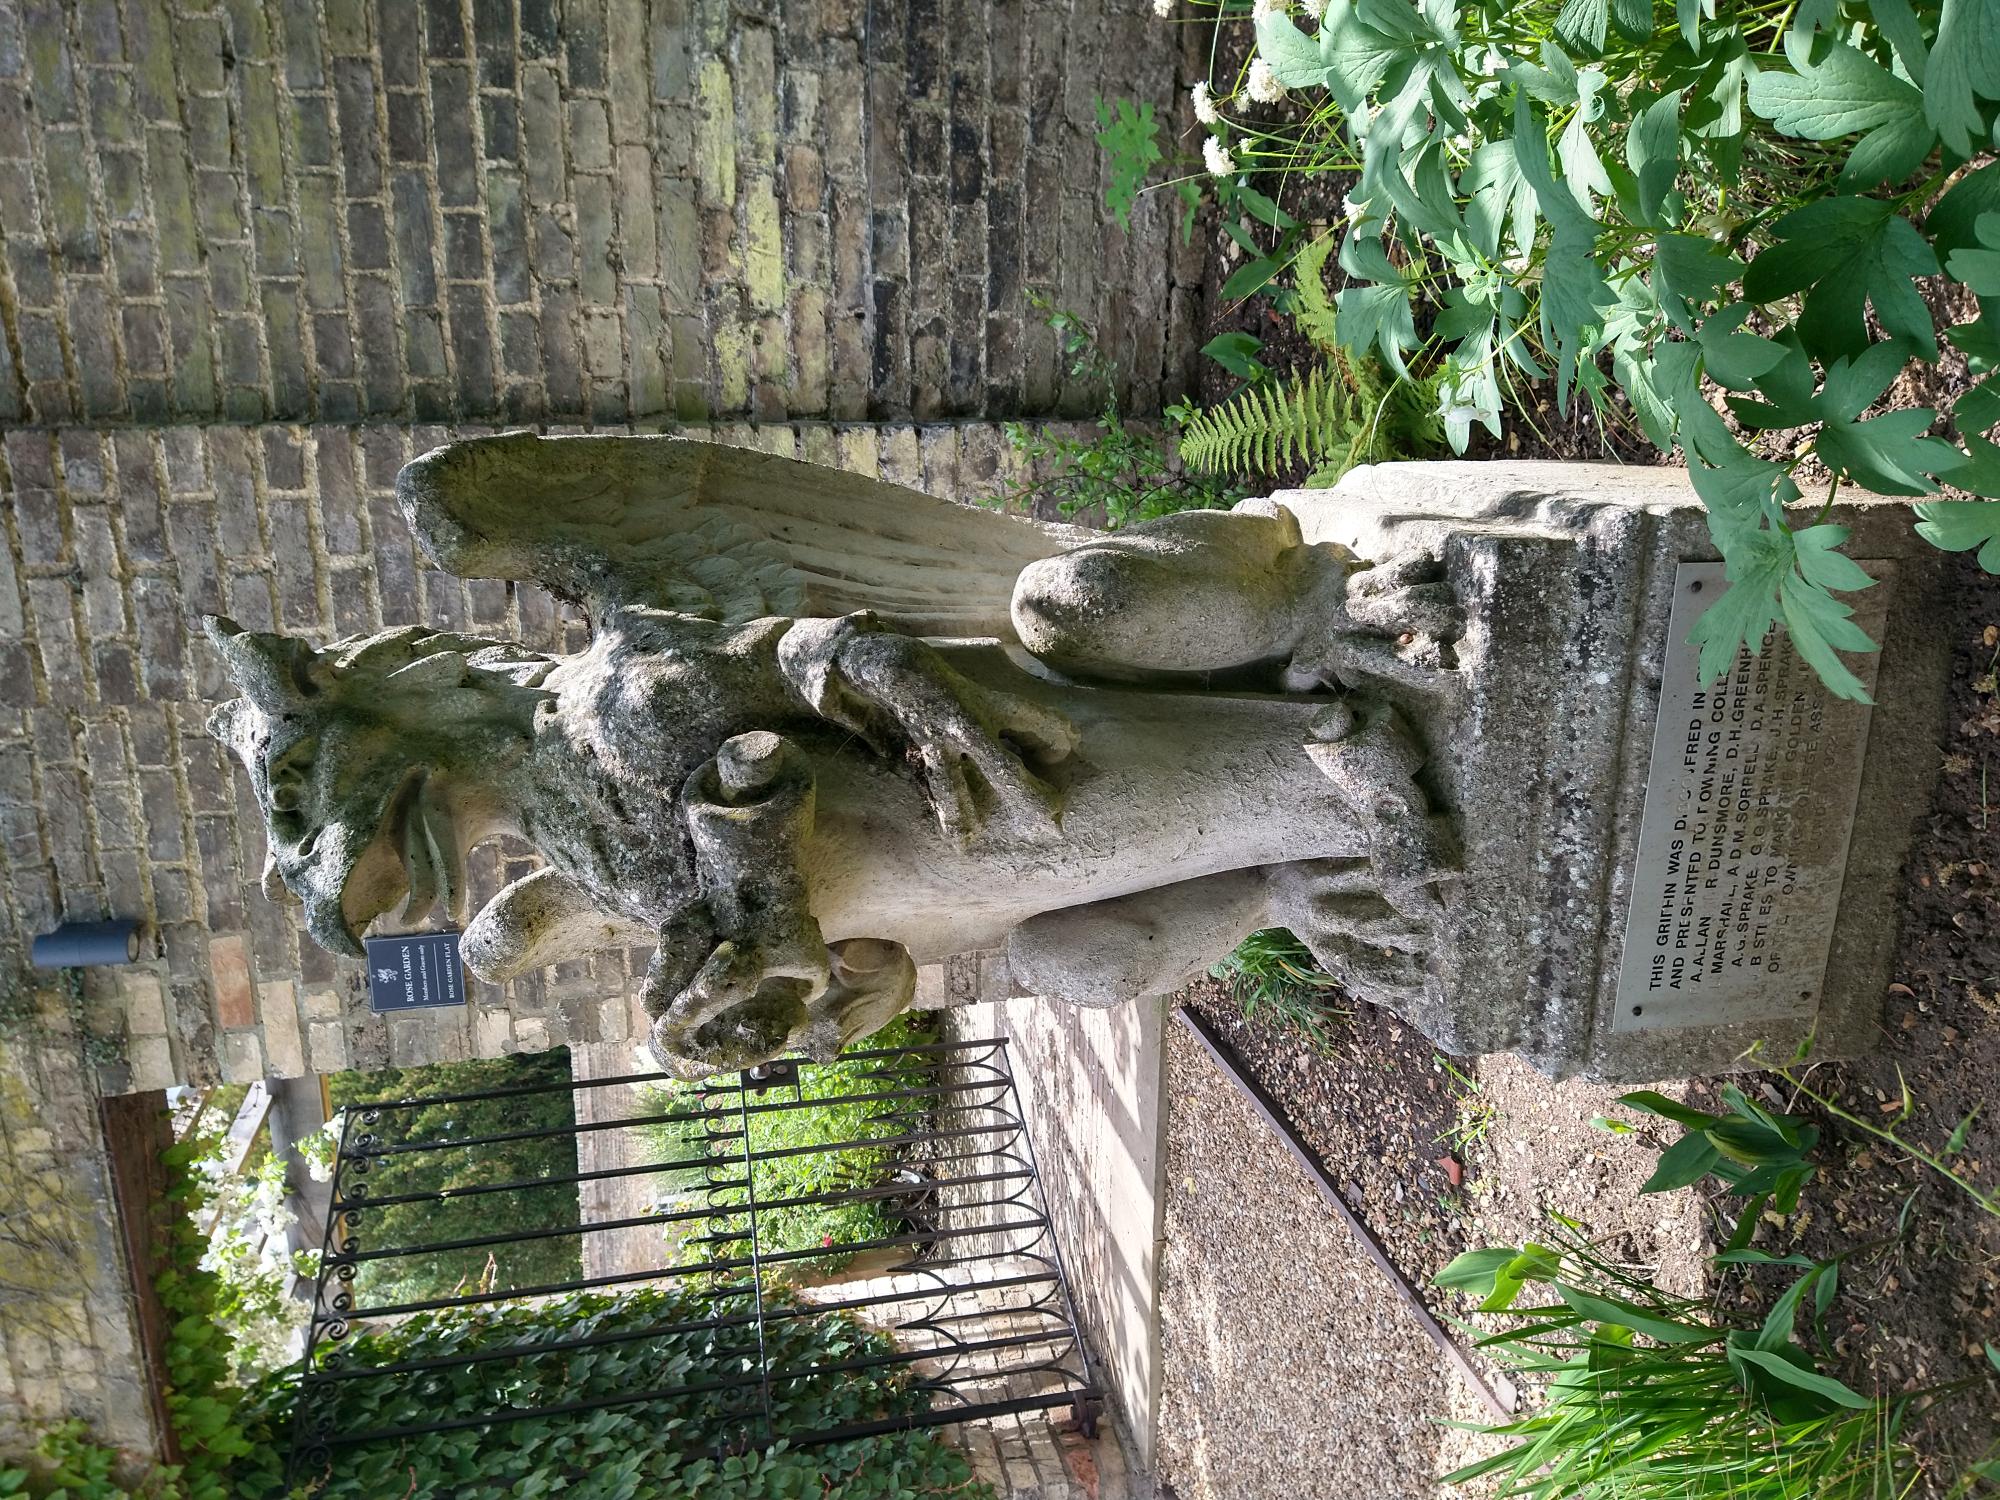 Photograph of a stone griffin statue